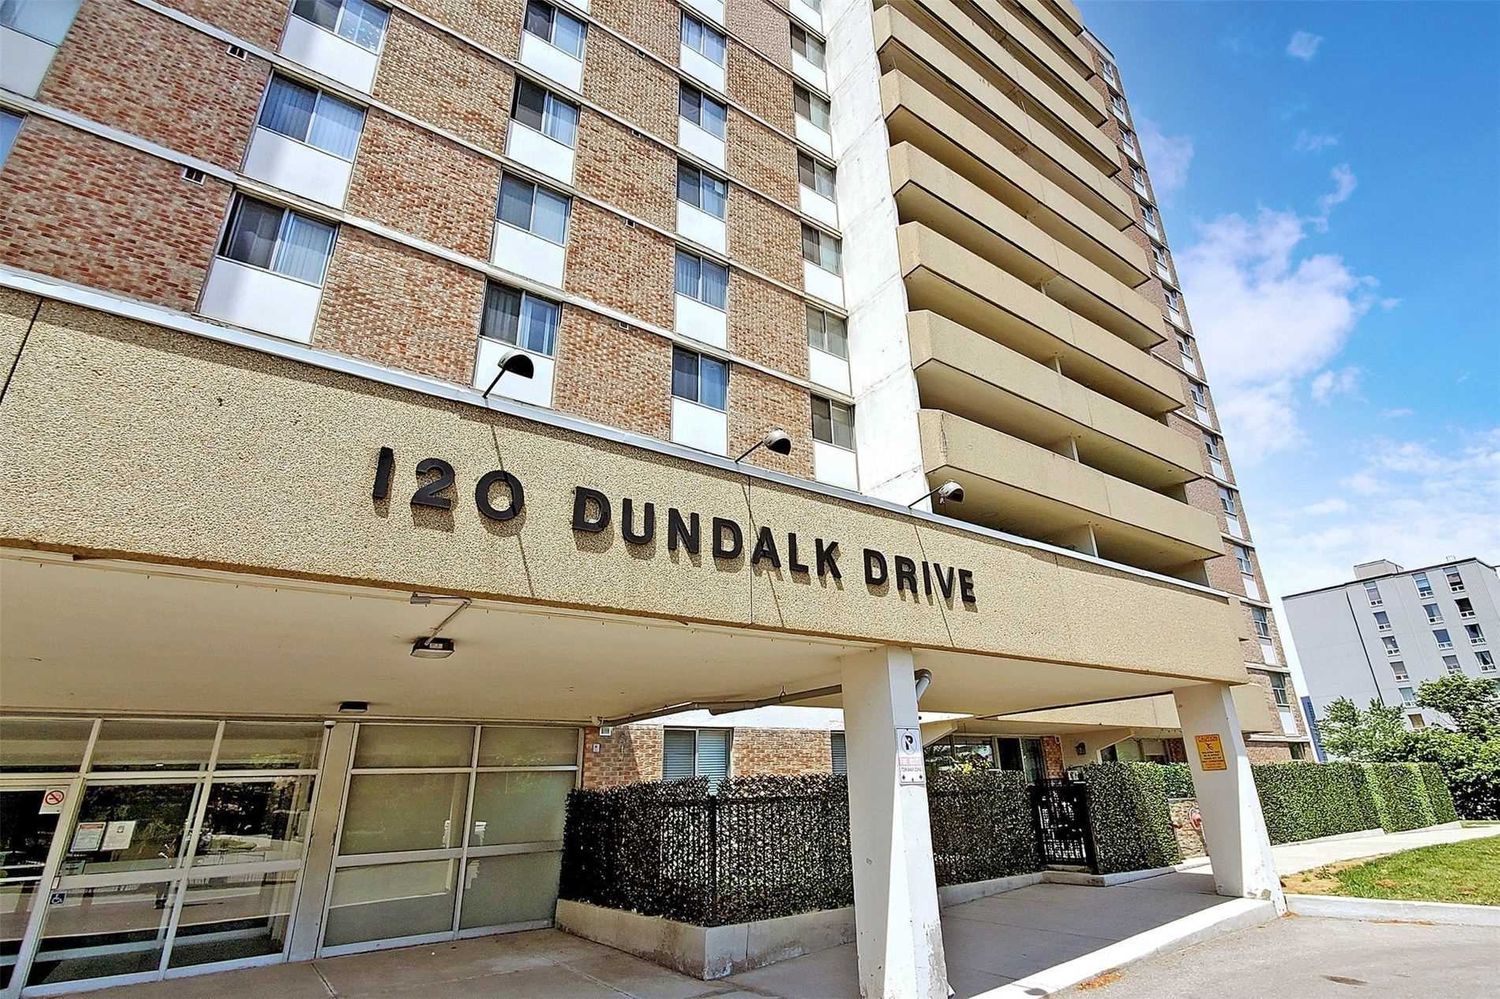 120 Dundalk Drive. 120 Dundalk Drive Condos is located in  Scarborough, Toronto - image #2 of 2